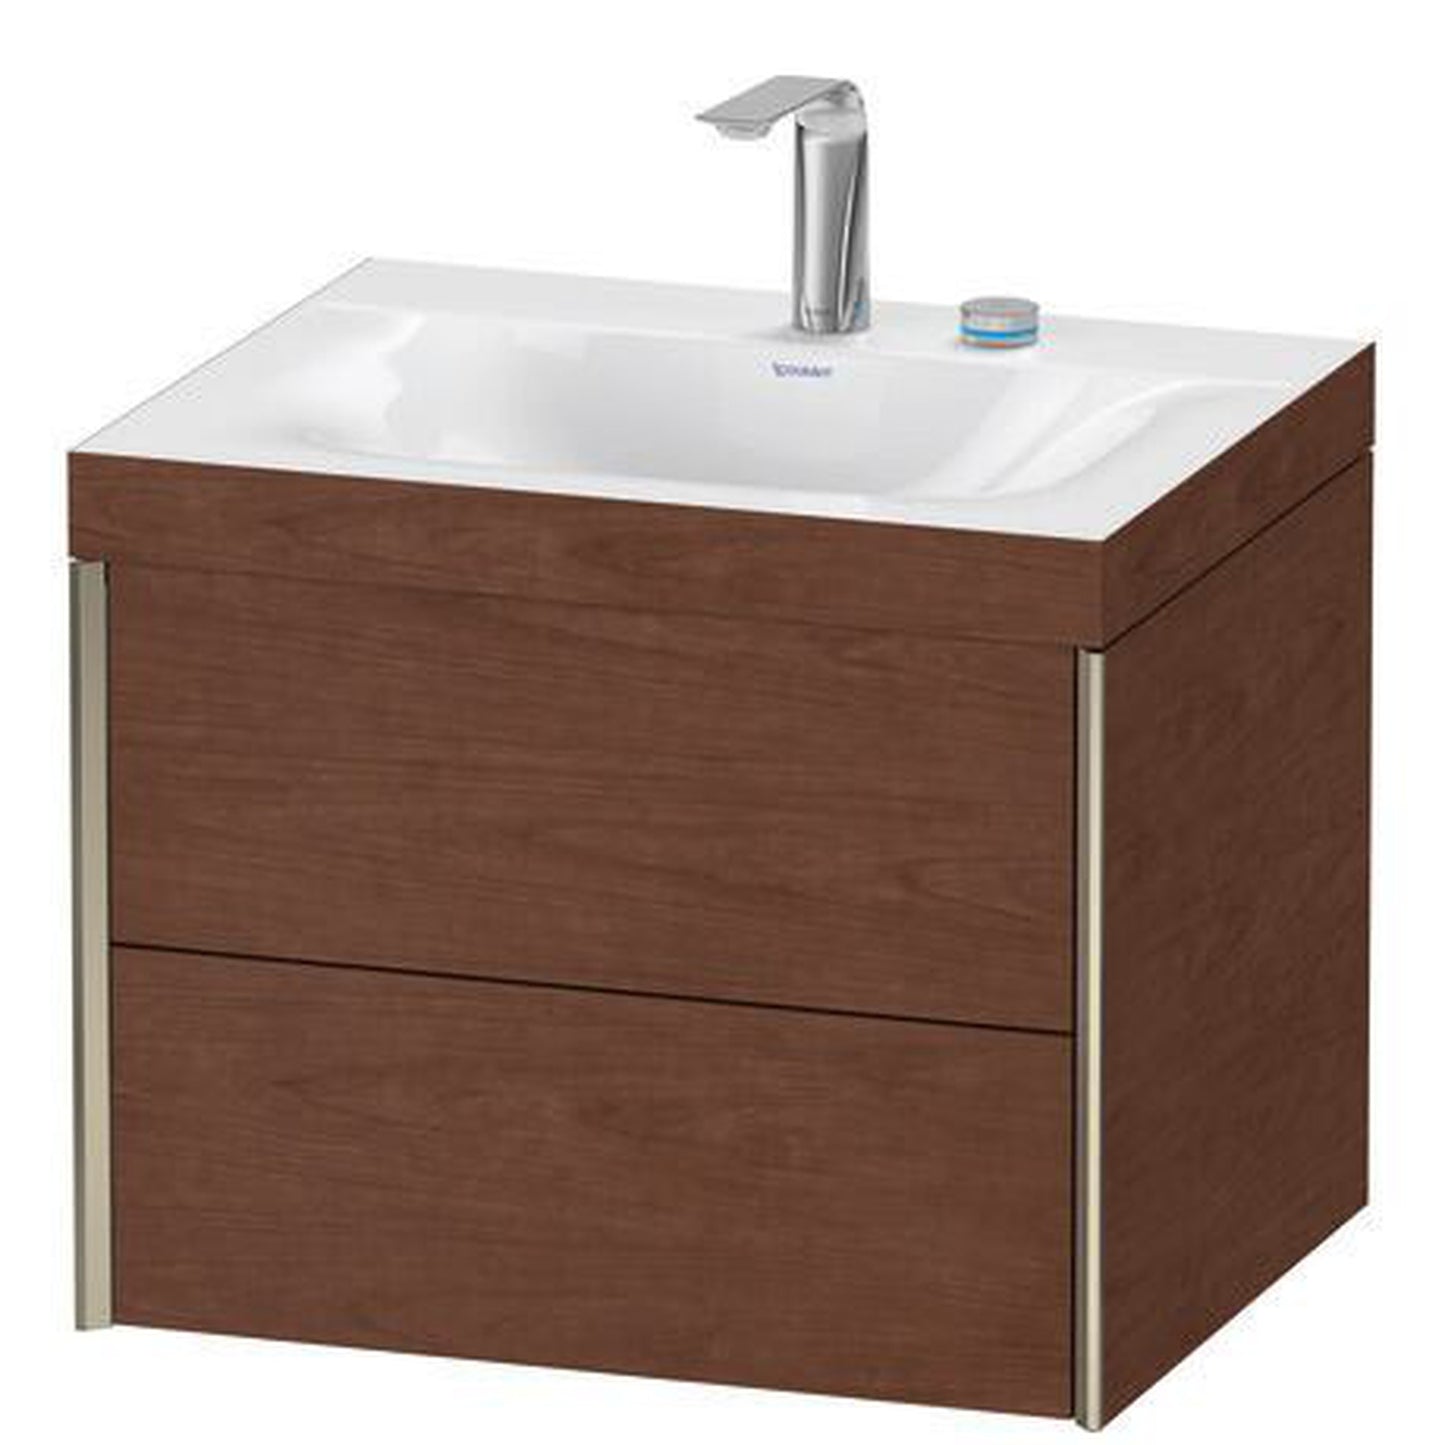 Duravit Xviu 24" x 20" x 19" Two Drawer C-Bonded Wall-Mount Vanity Kit With Two Tap Holes, American Walnut (XV4614EB113C)